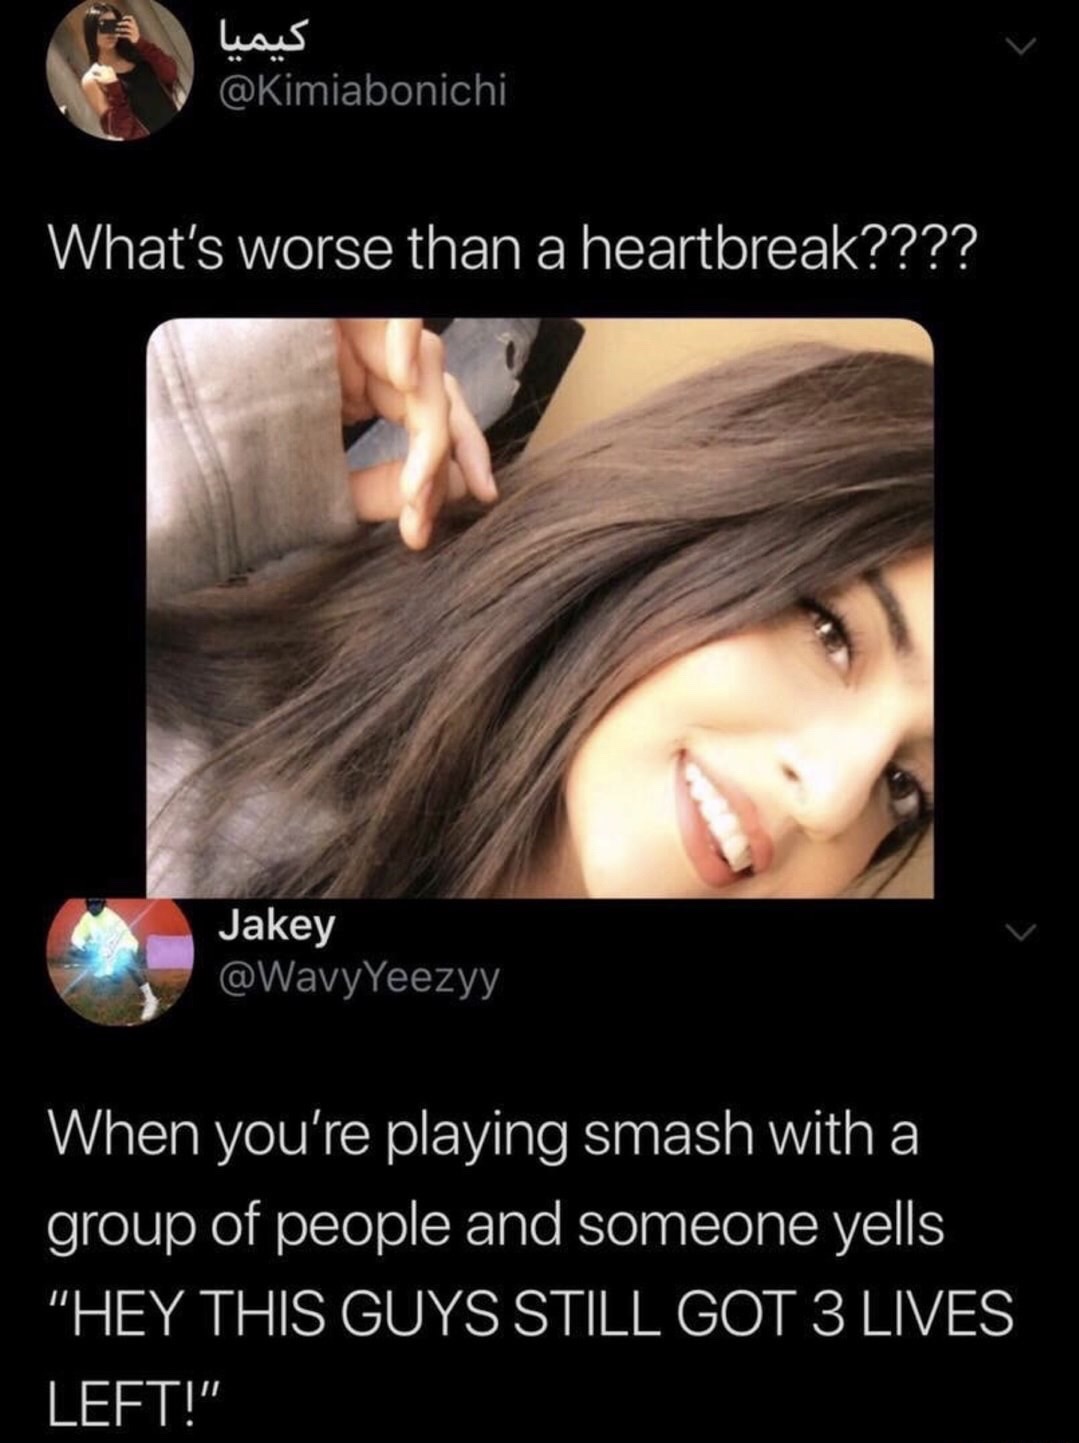 what's worse than a heartbreak meme - What's worse than a heartbreak???? Jakey When you're playing smash with a group of people and someone yells "Hey This Guys Still Got 3 Lives Left!"